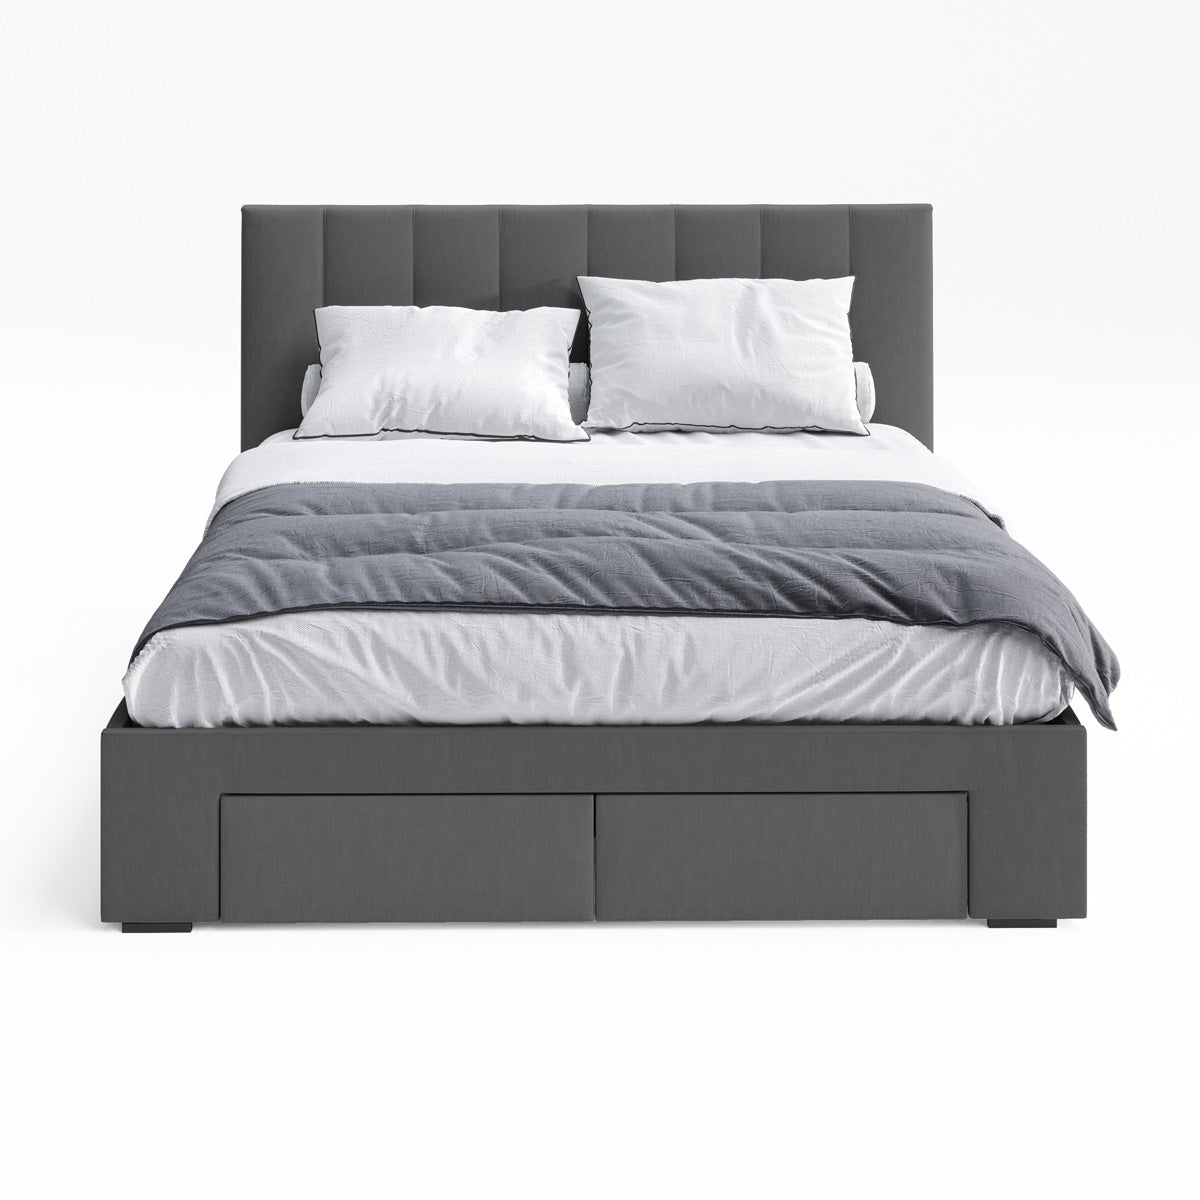 Ormond Storage Bed Frame with Four Extra Large Drawers (Charcoal Fabric)